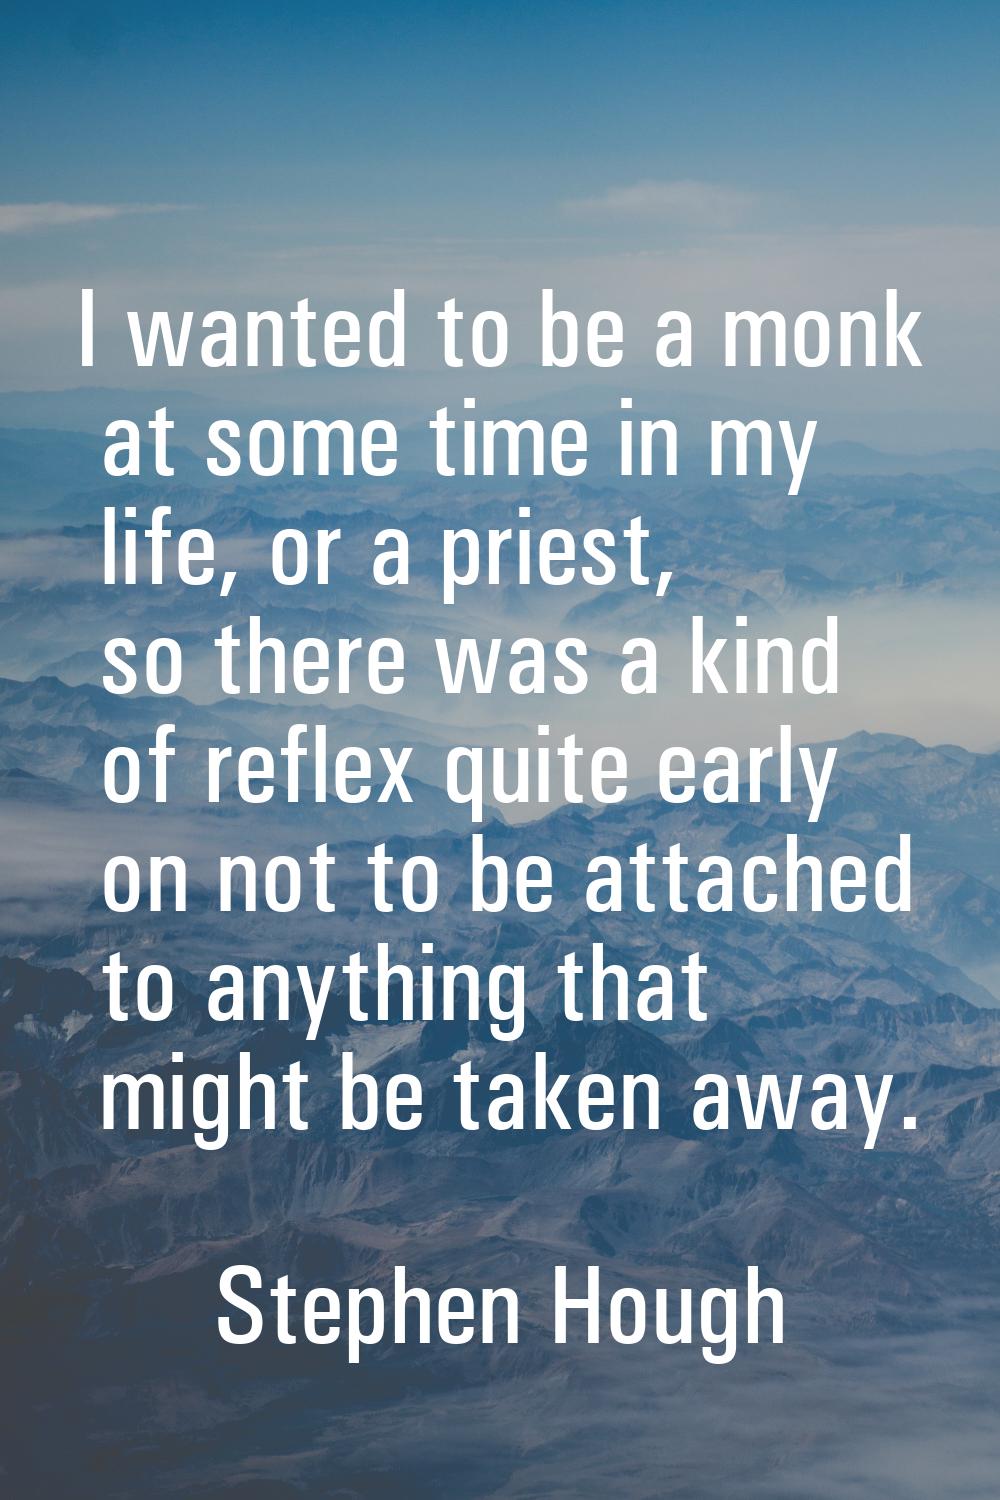 I wanted to be a monk at some time in my life, or a priest, so there was a kind of reflex quite ear